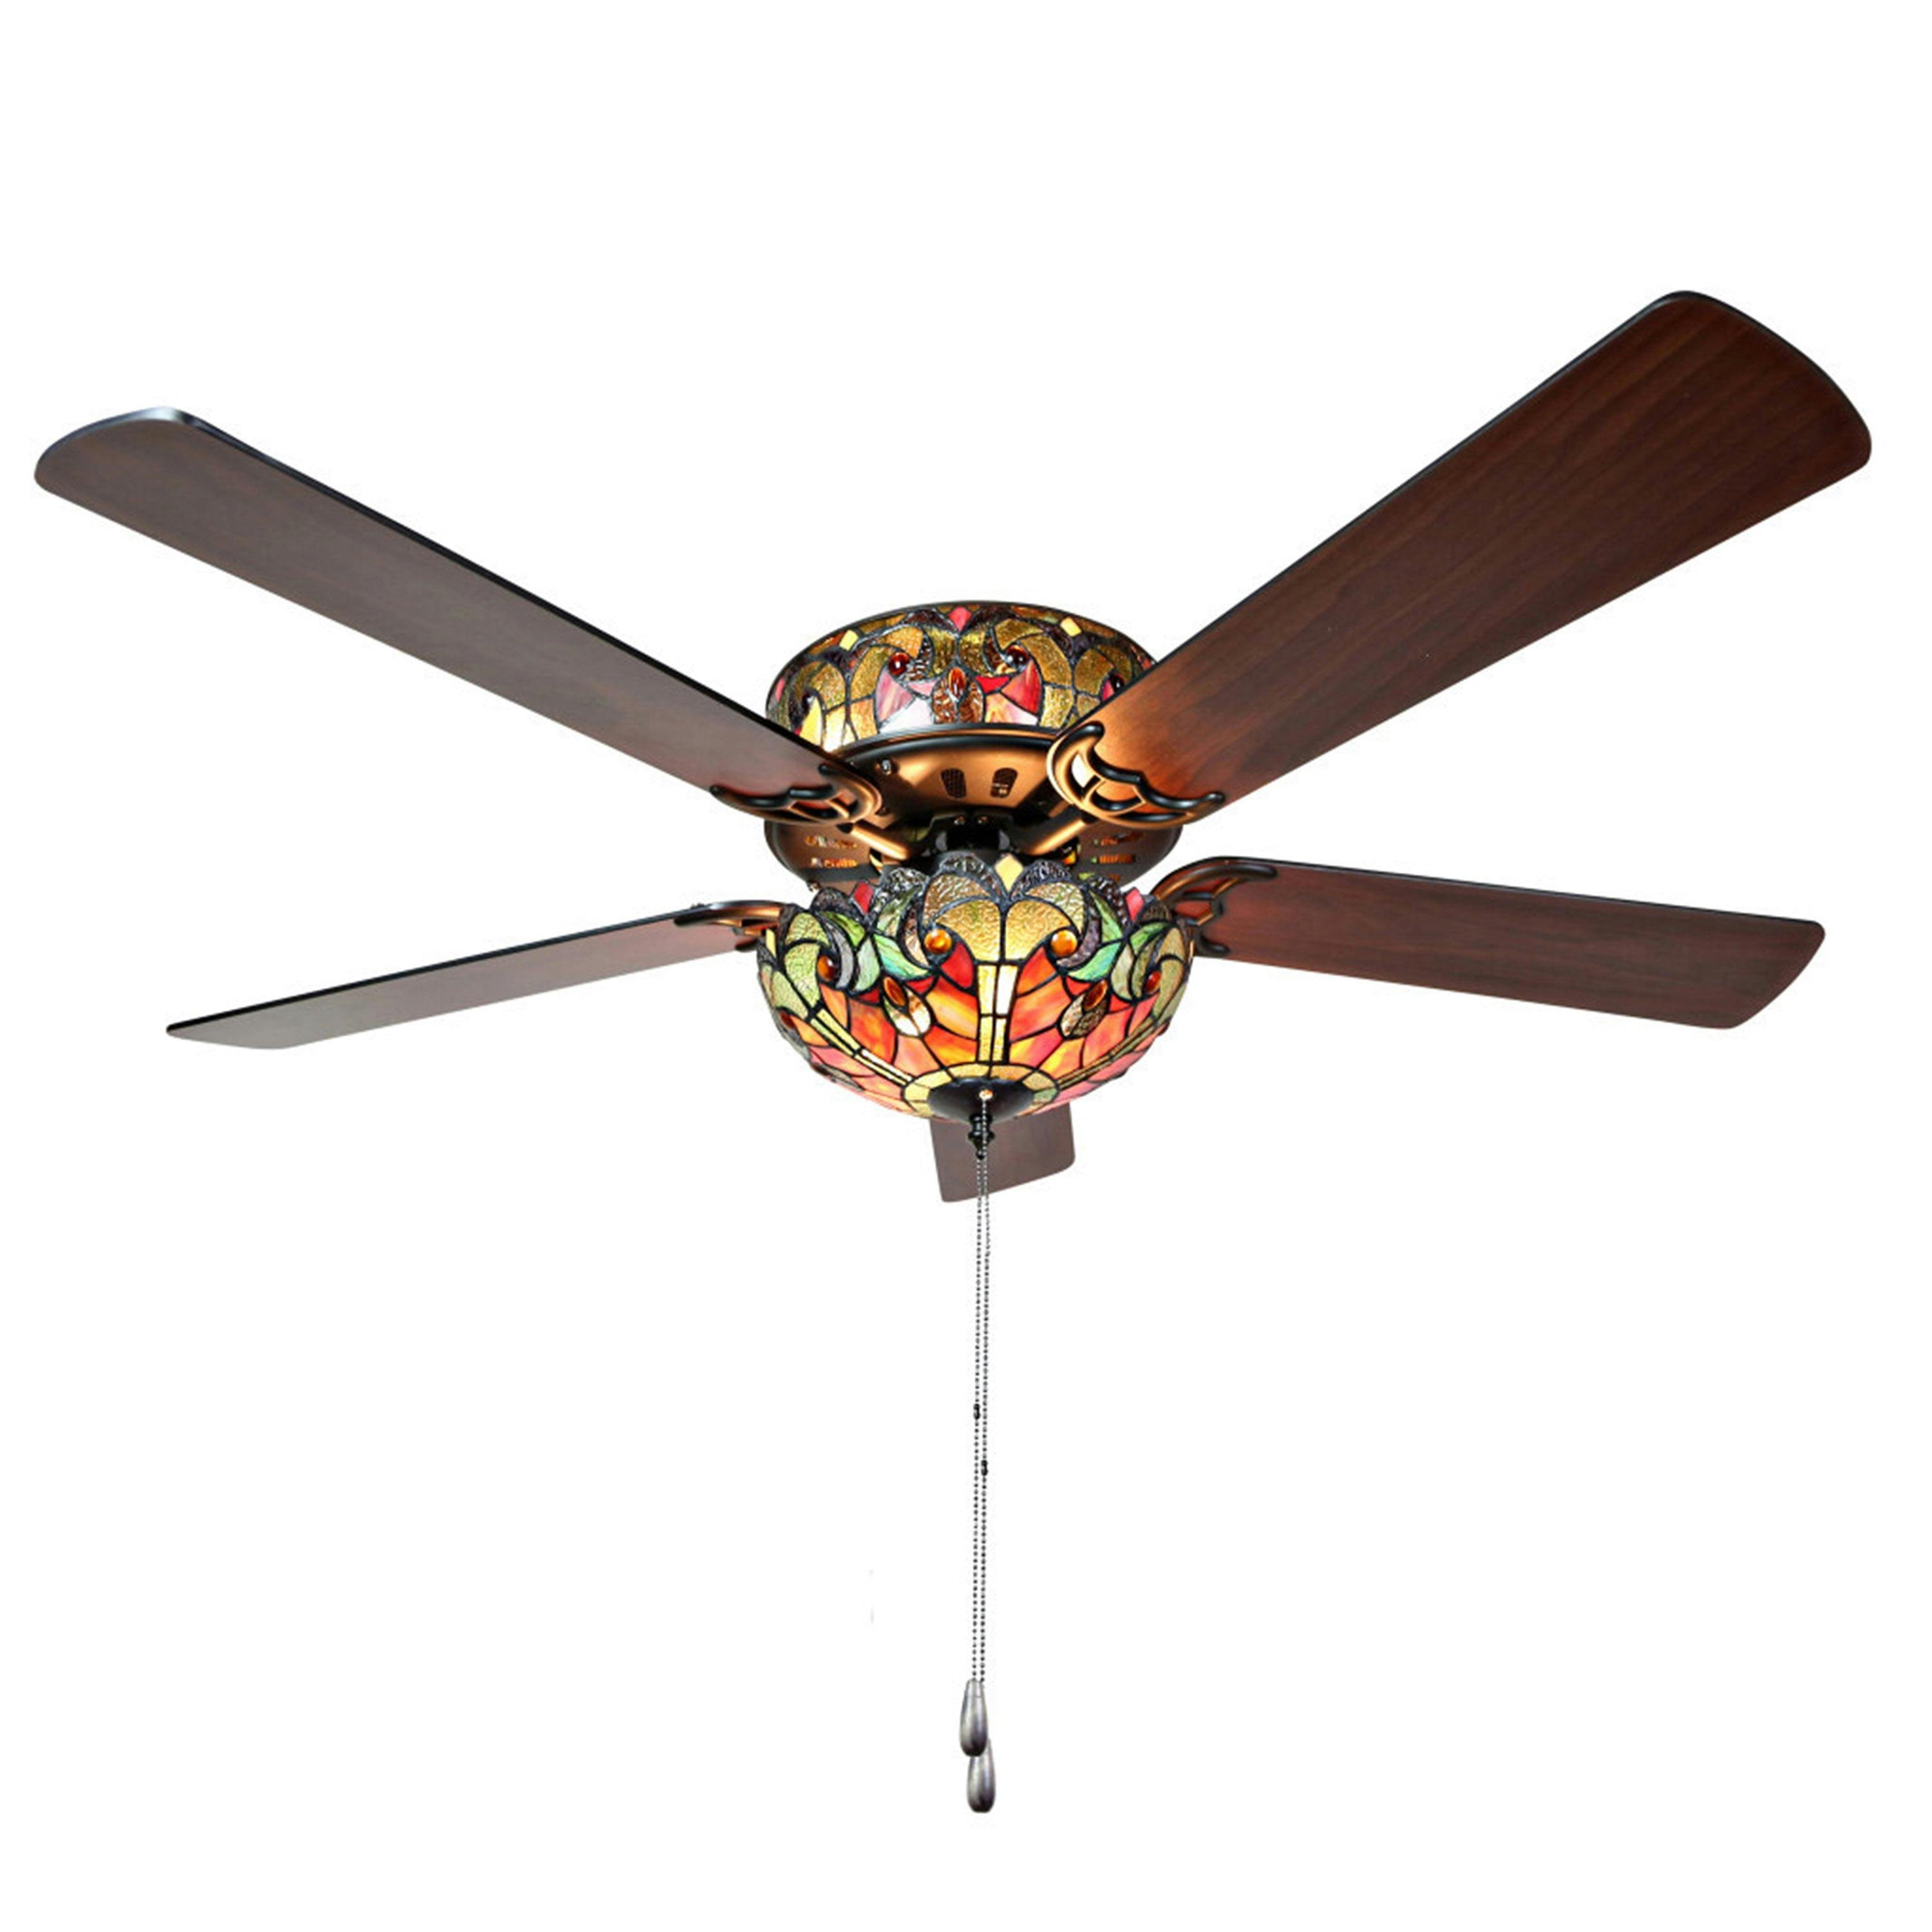 Halston 52" Traditional Tiffany-Style Stained Glass Ceiling Fan with Lighting